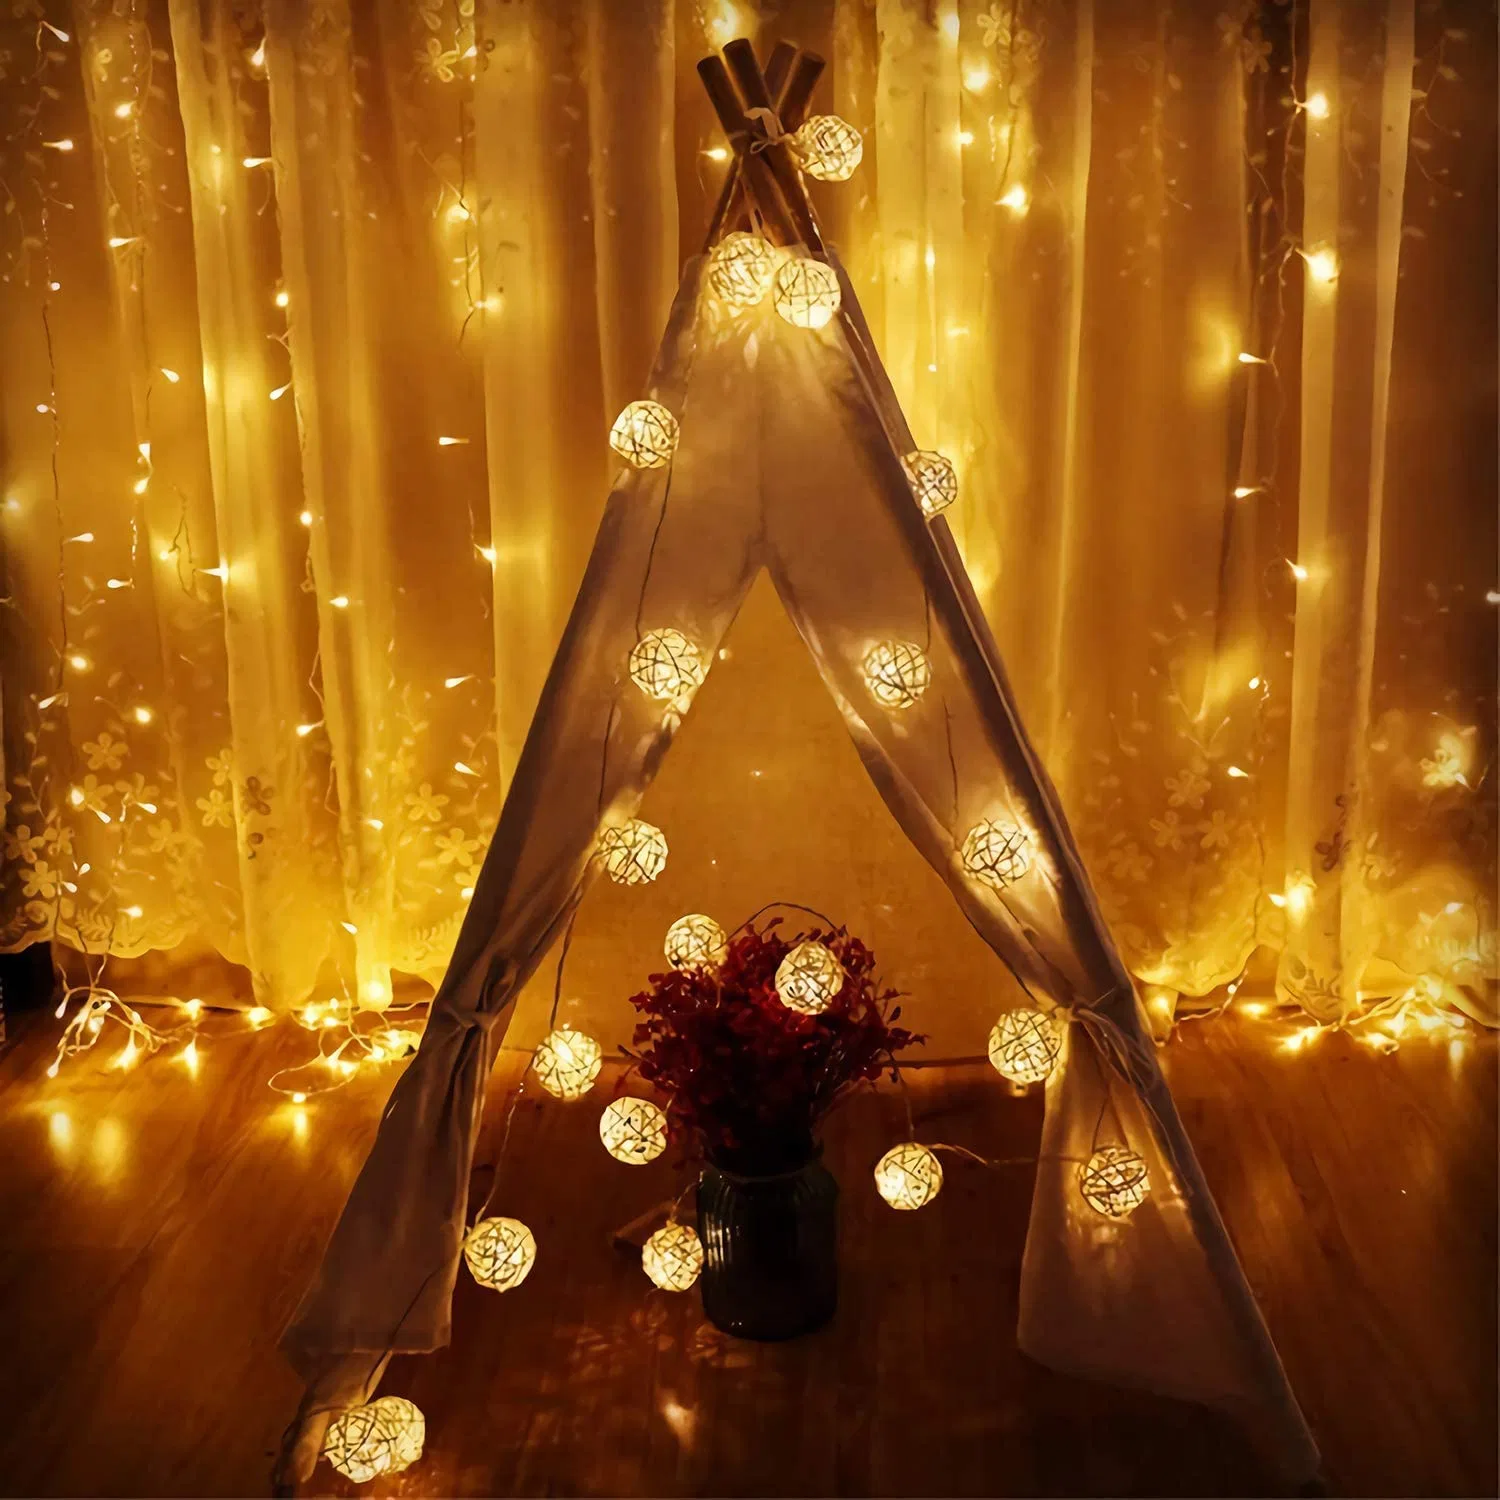 20LEDs Warm White LED Fairy String Lights Rattan Balls Garland Chain Holiday Christmas Tree Decoration